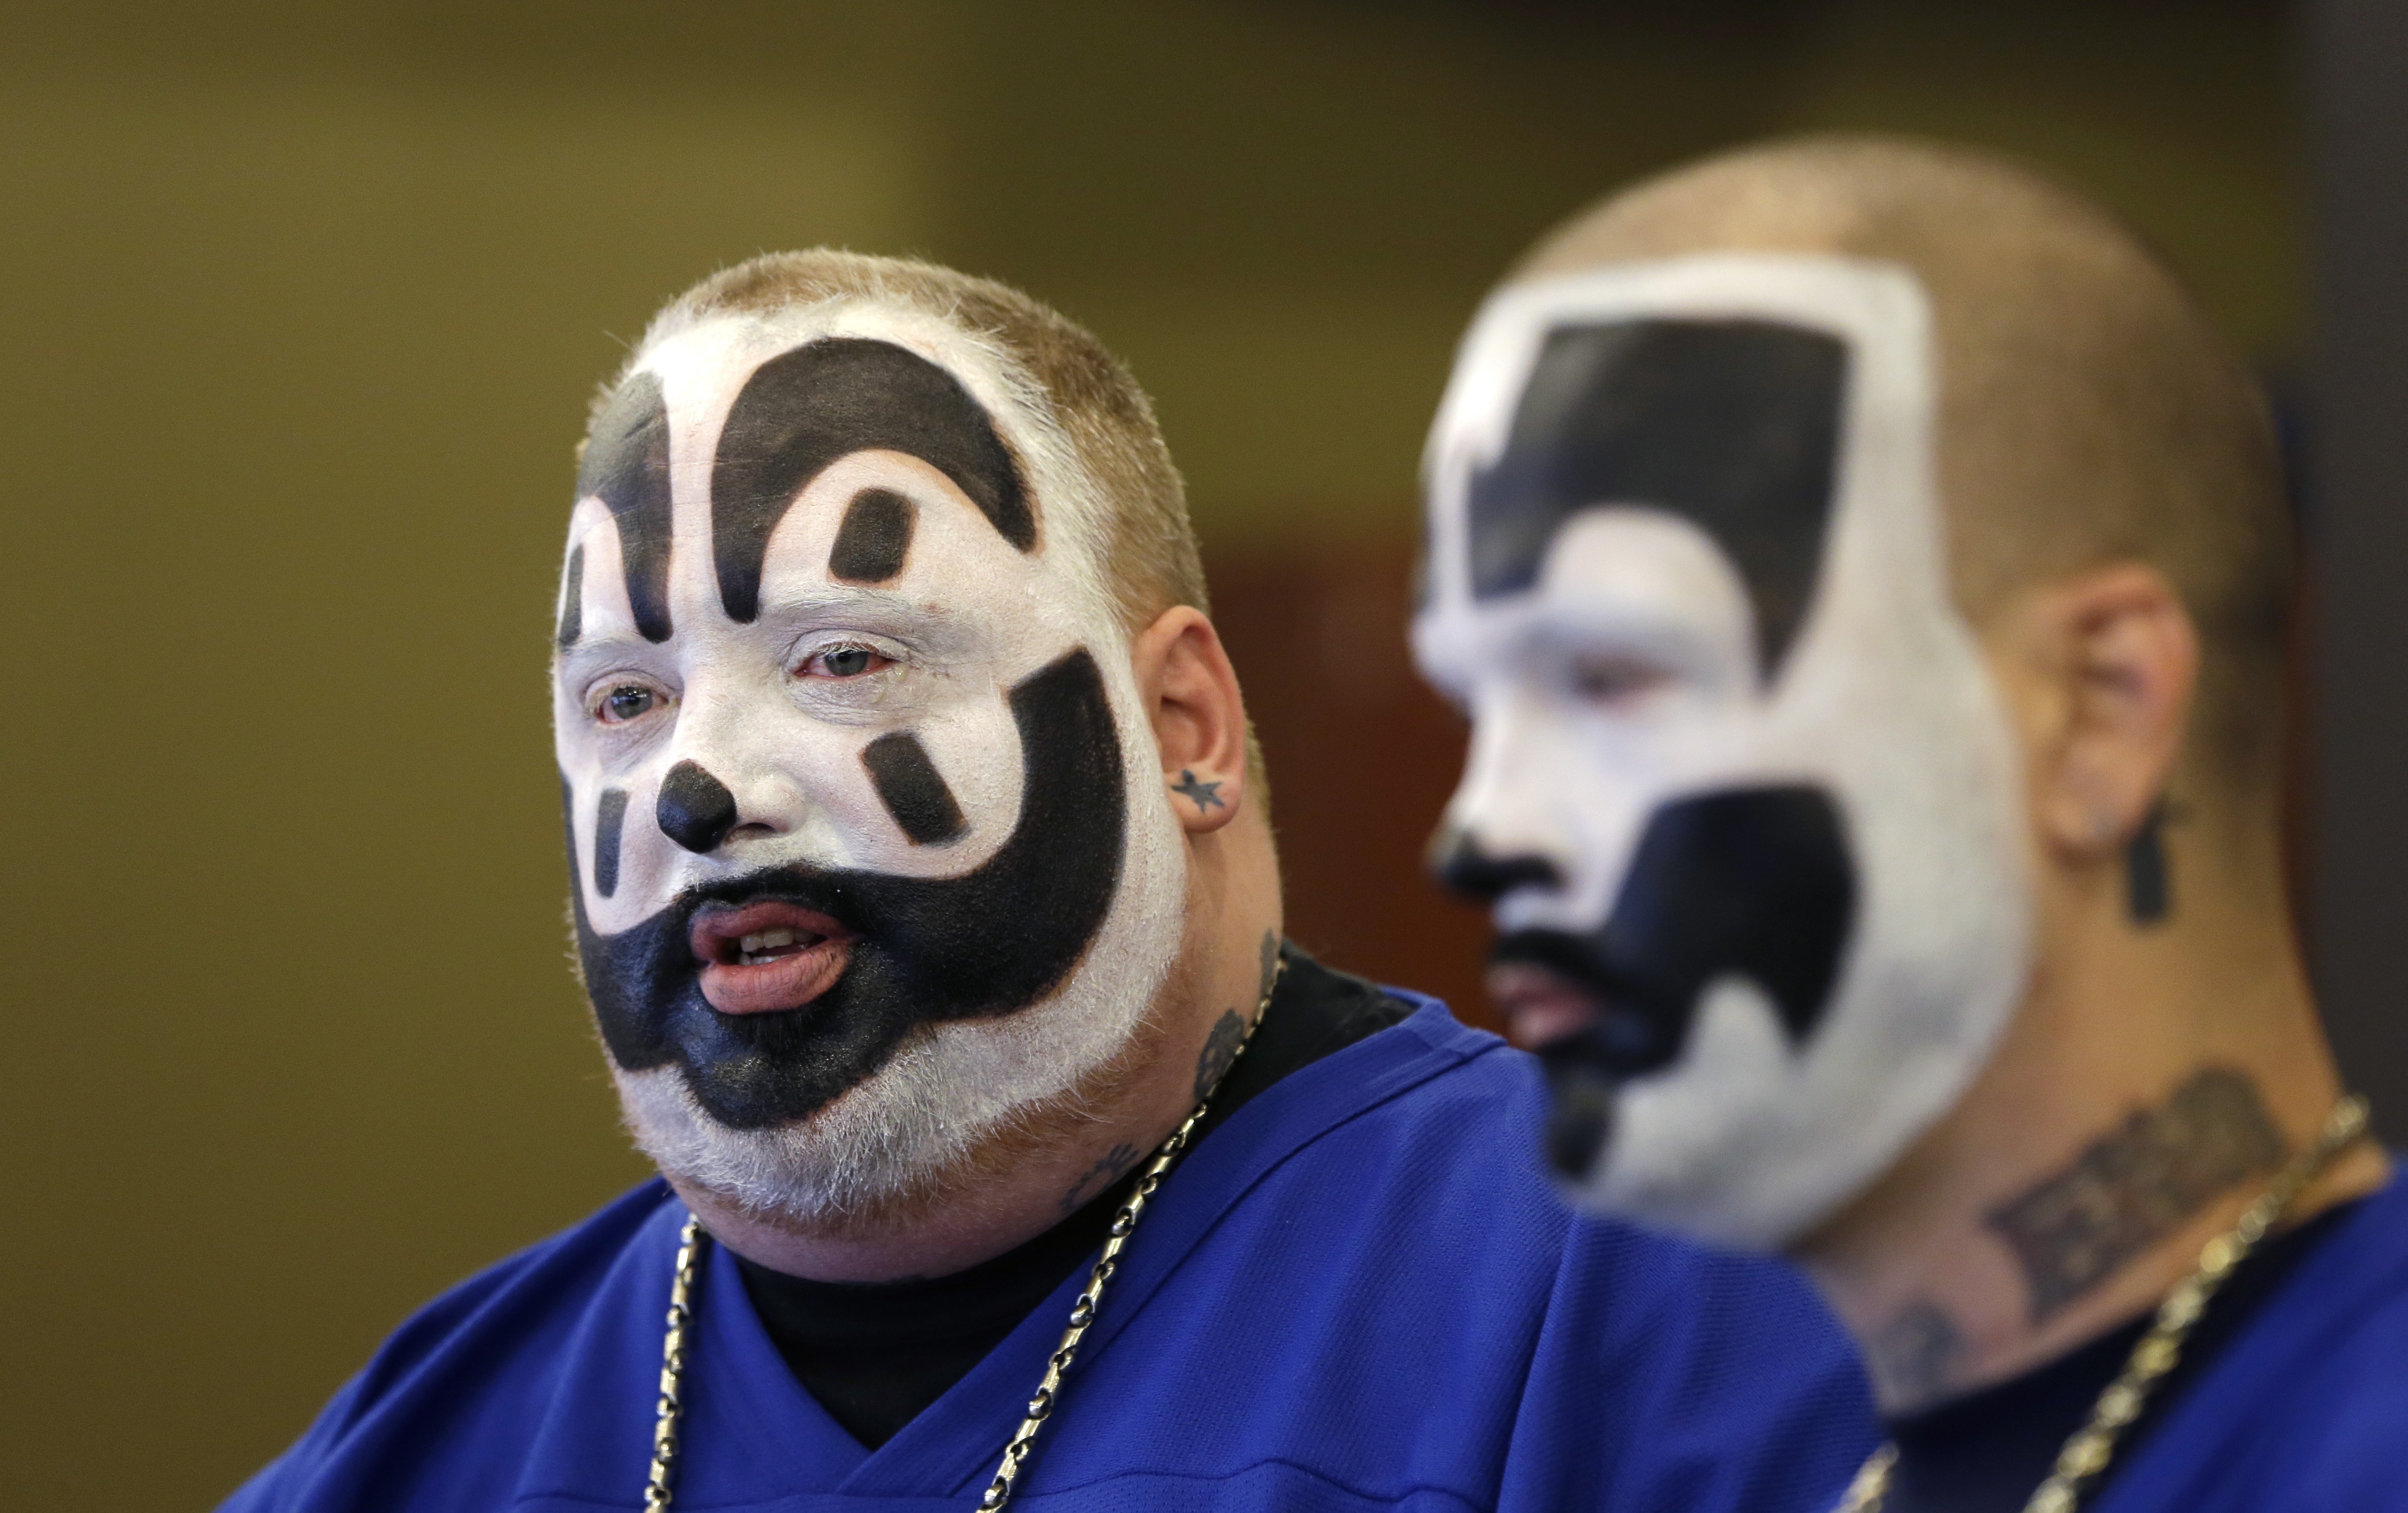 Who are the killers of the Juggalo?